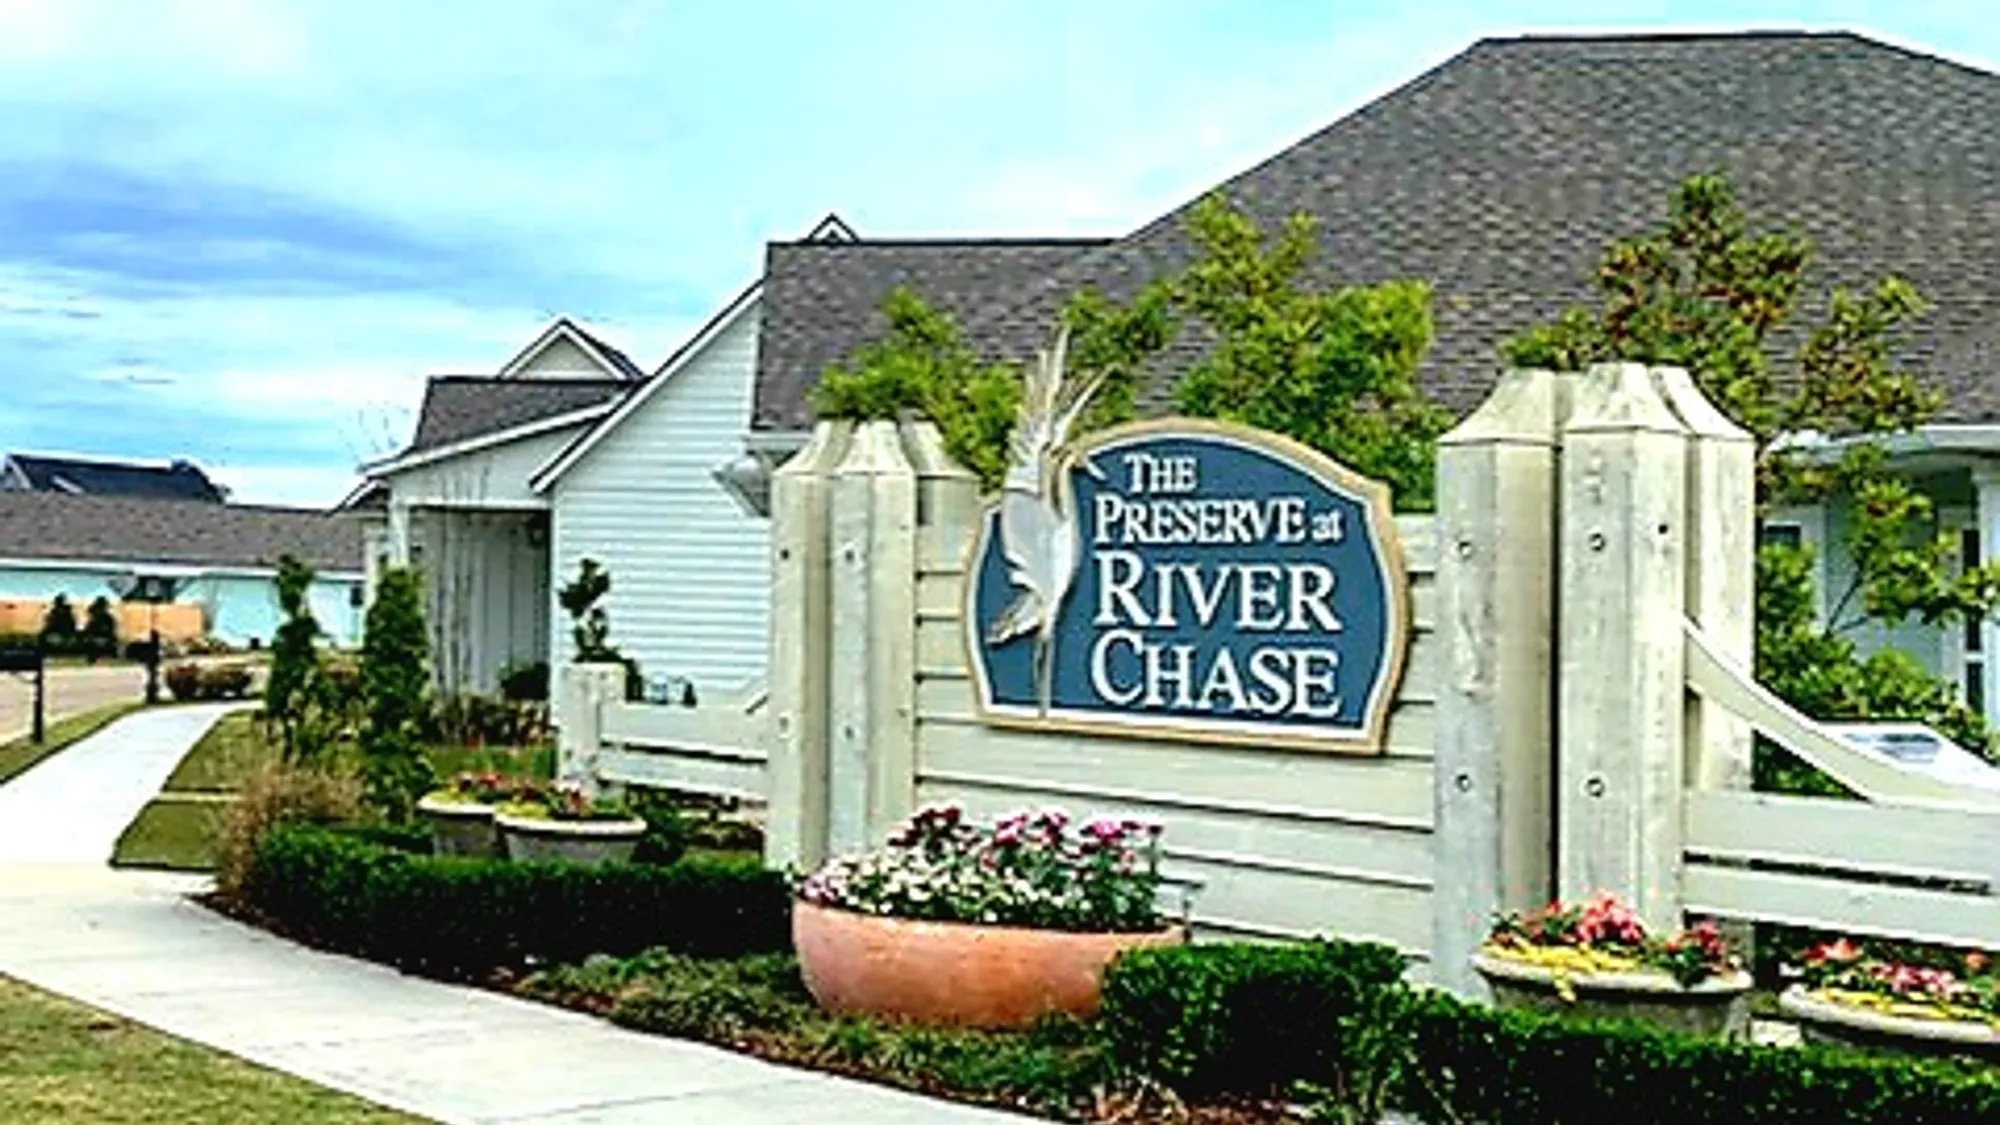 entrance of a new home community - the preserve at river chase by sunrise homes